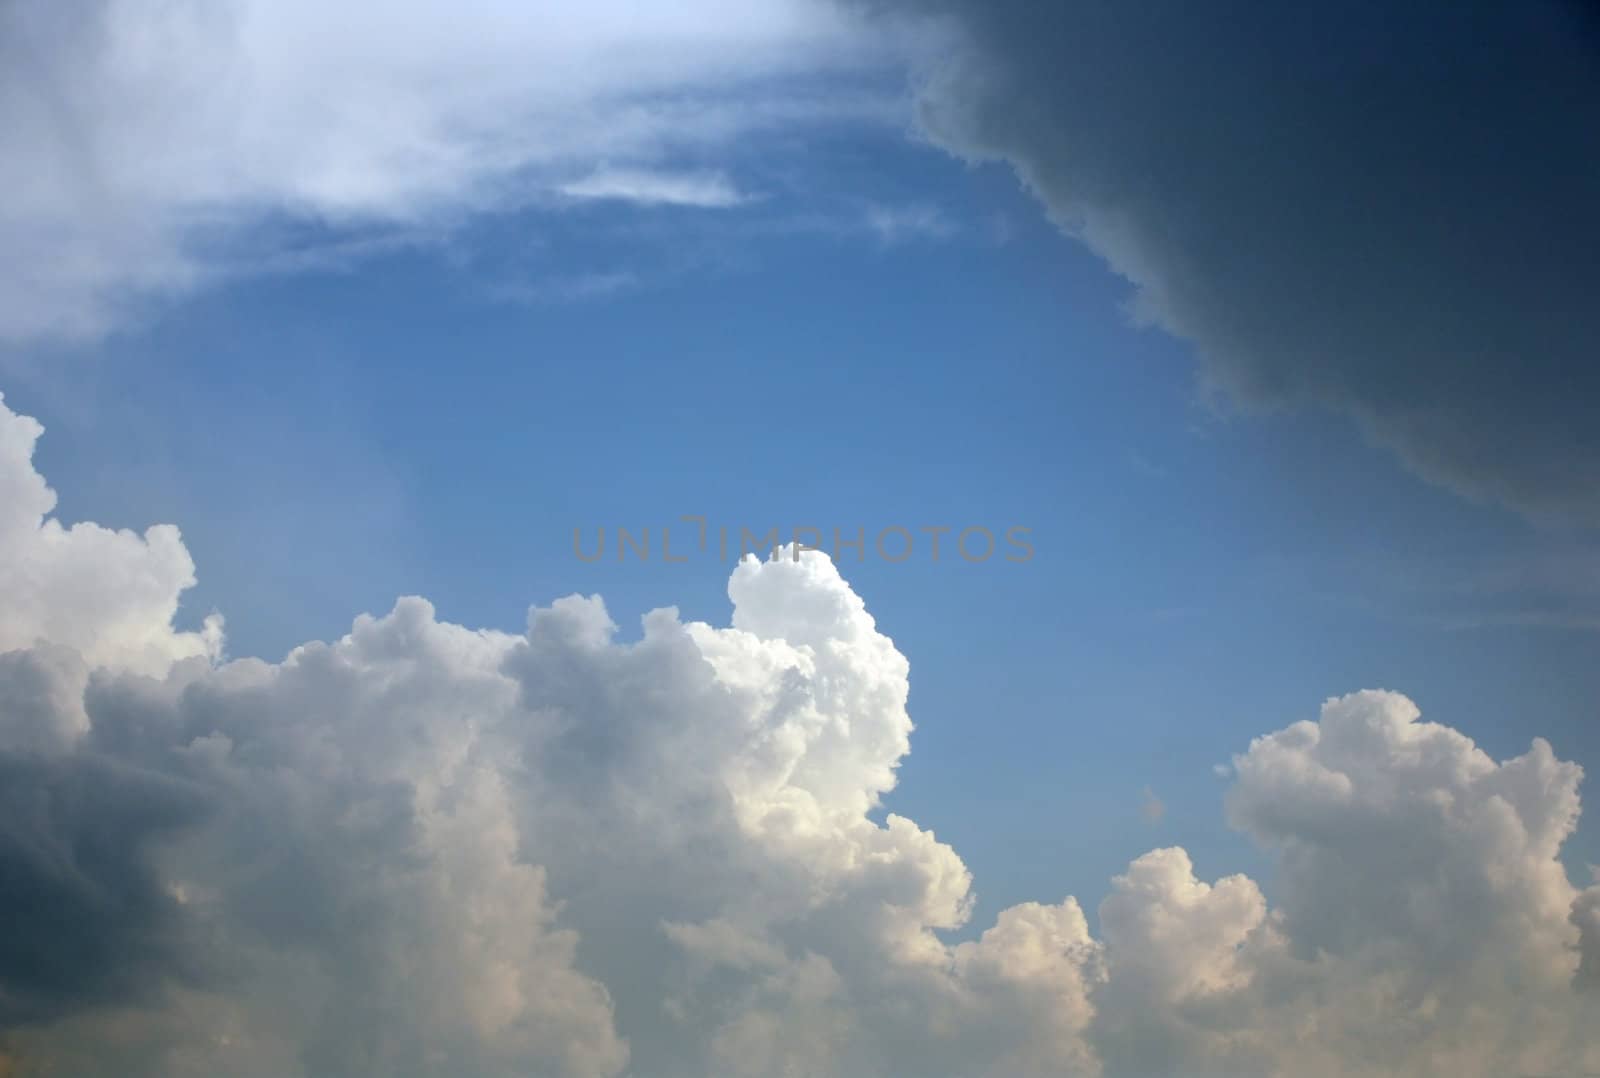 The image of white clouds on a background of the dark blue sky